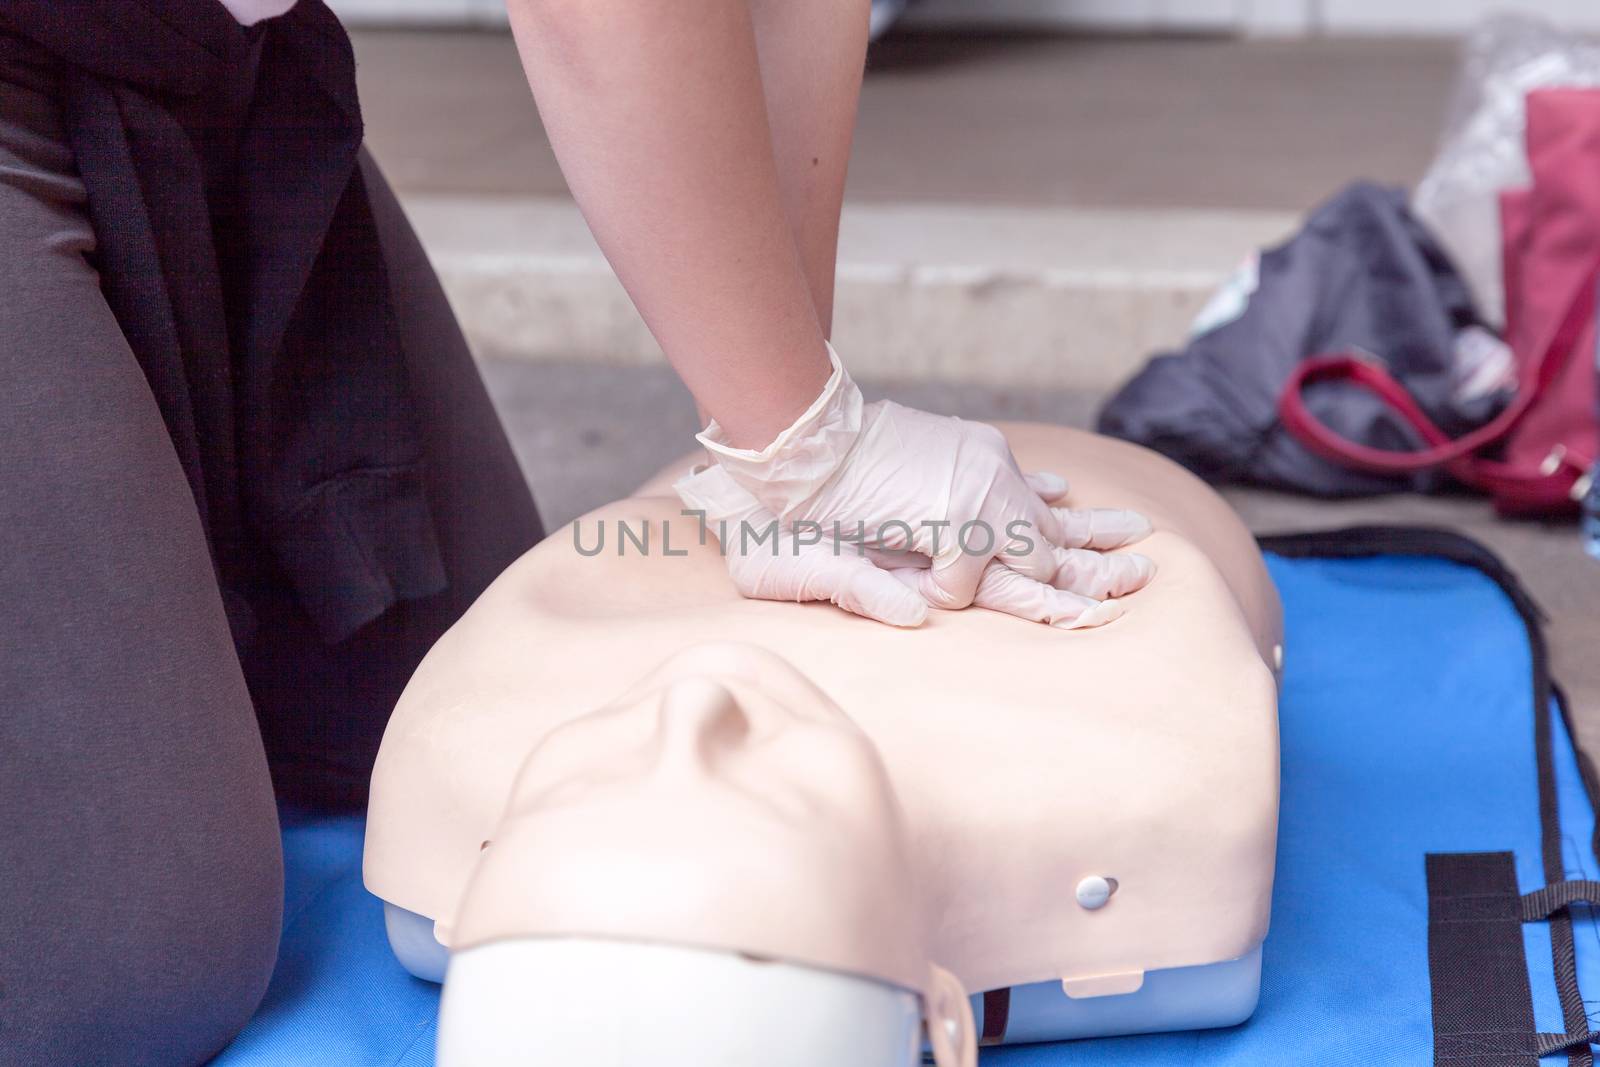 First aid. Cardiopulmonary resuscitation - CPR. by wellphoto